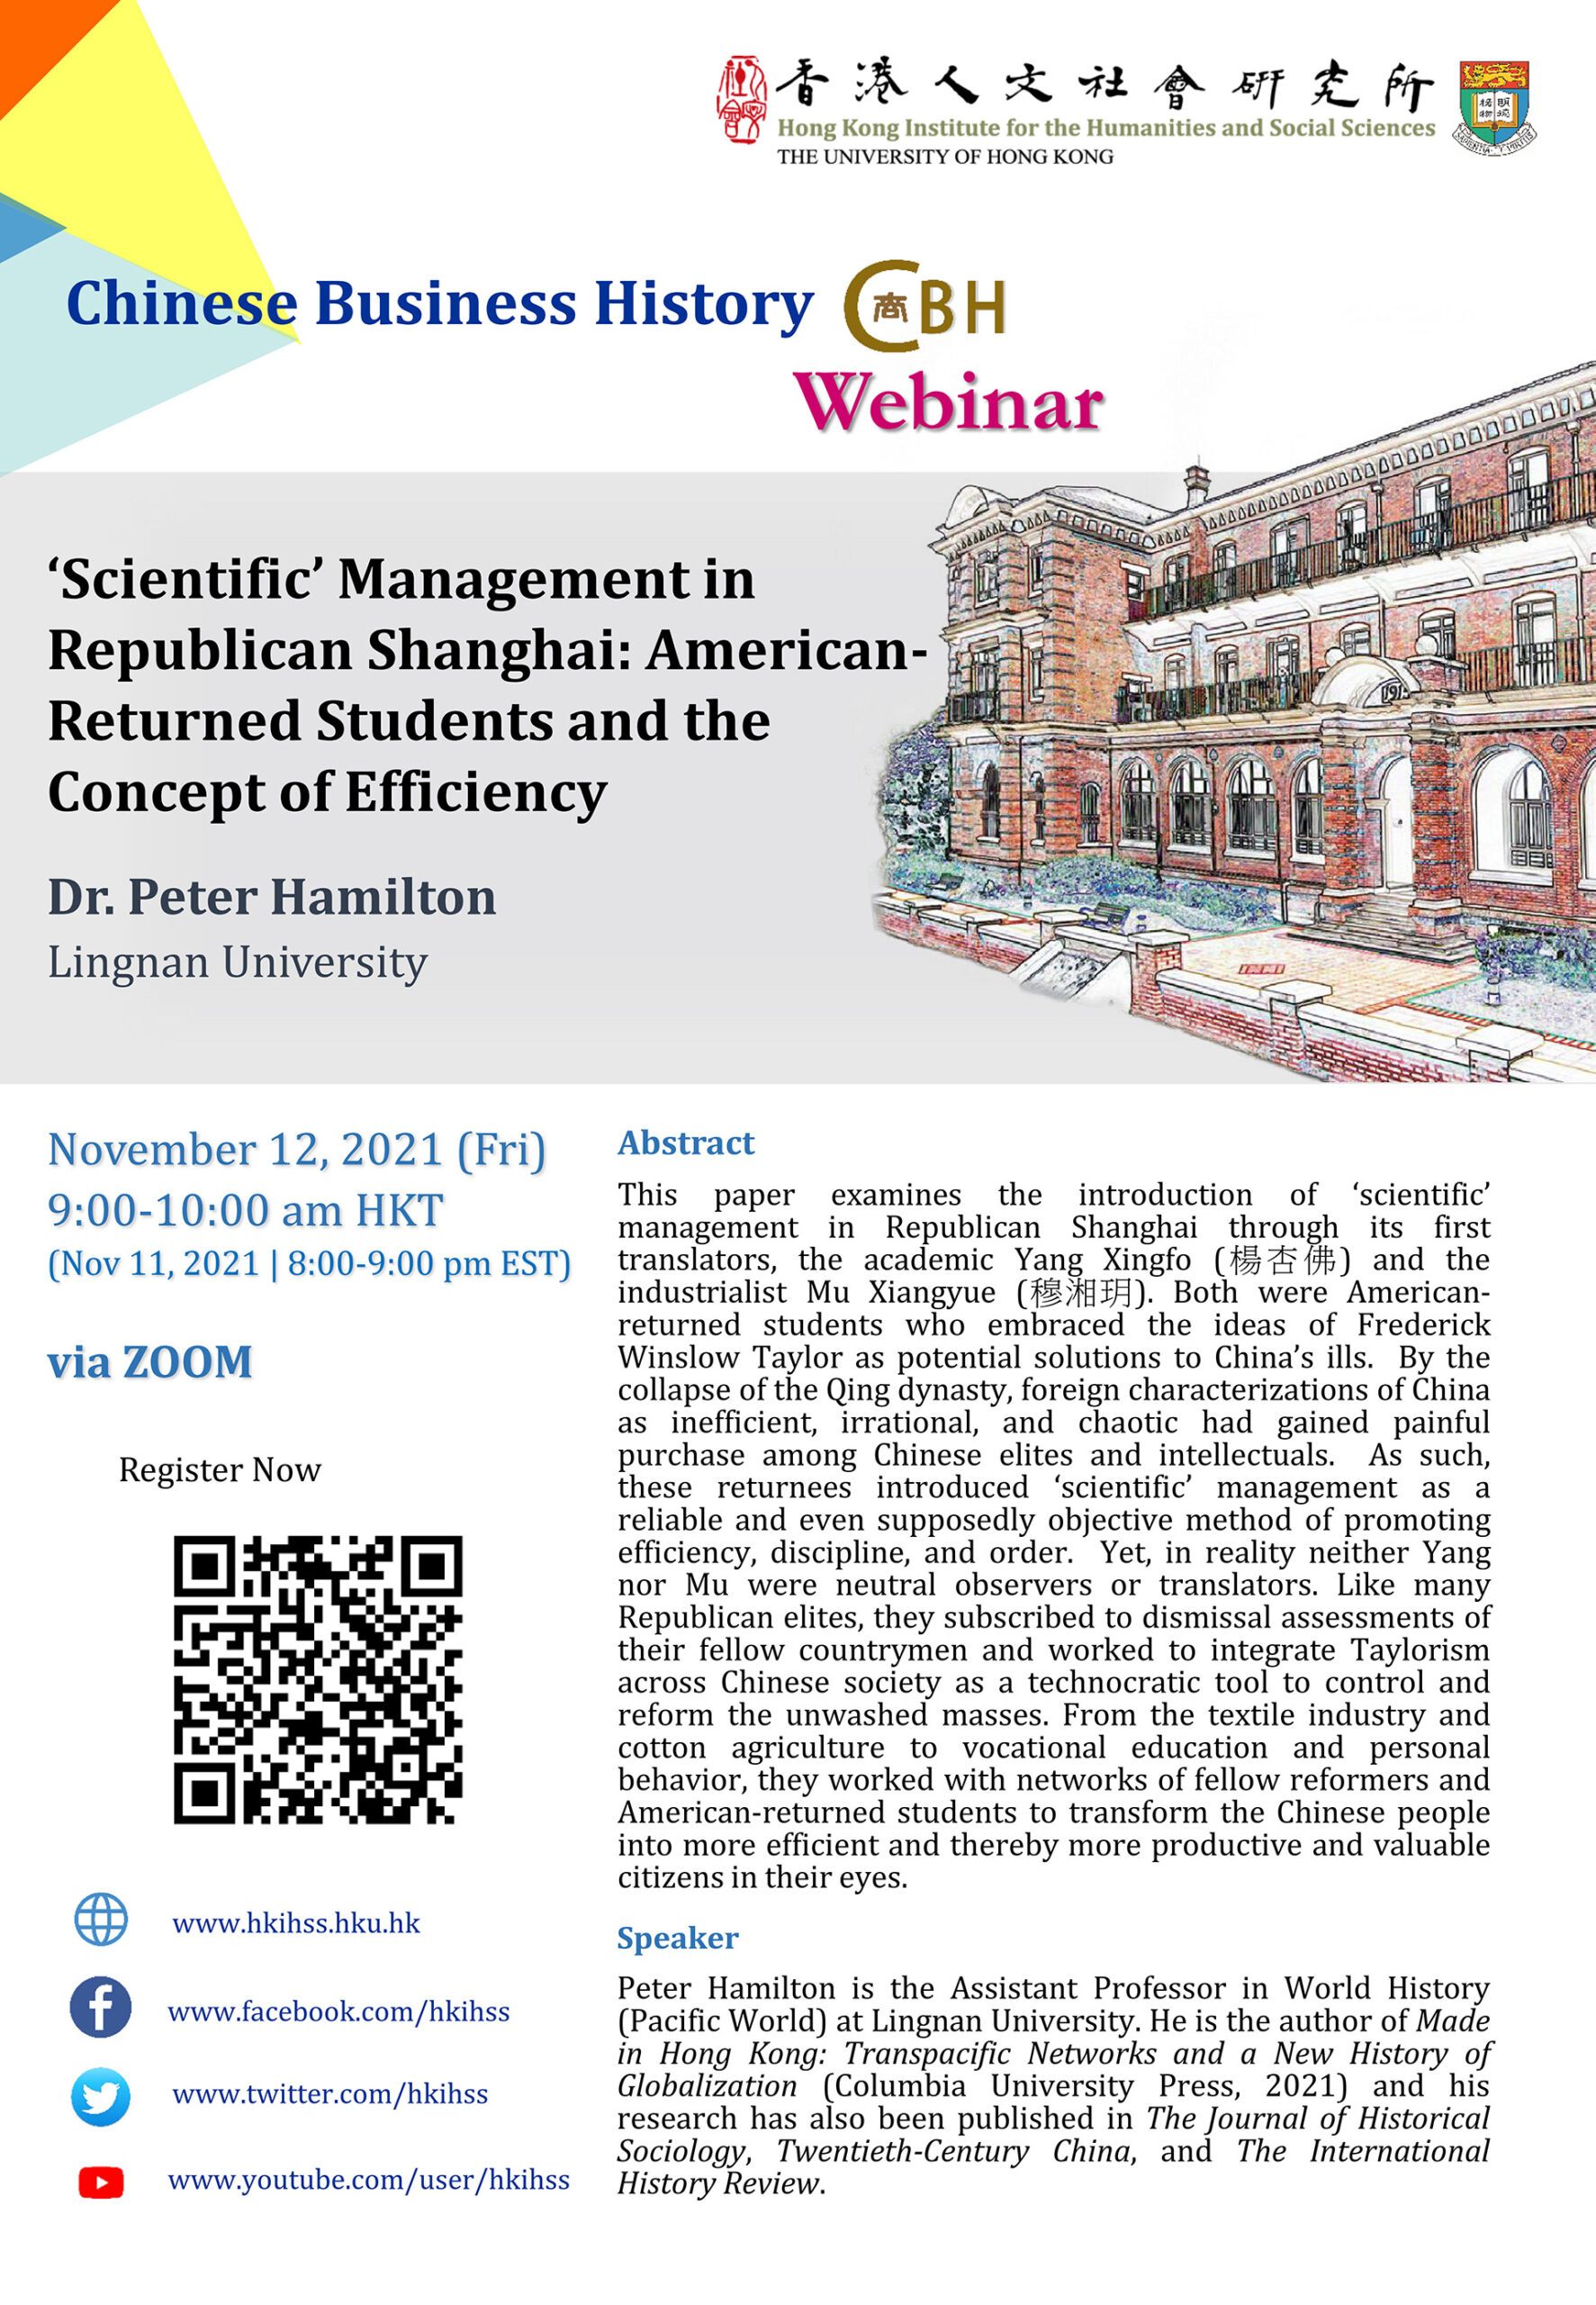 Chinese Business History Webinar on “‘Scientific’ Management in Republican Shanghai: American-Returned Students and the Concept of Efficiency ” by Dr. Peter Hamilton (November 12, 2021)